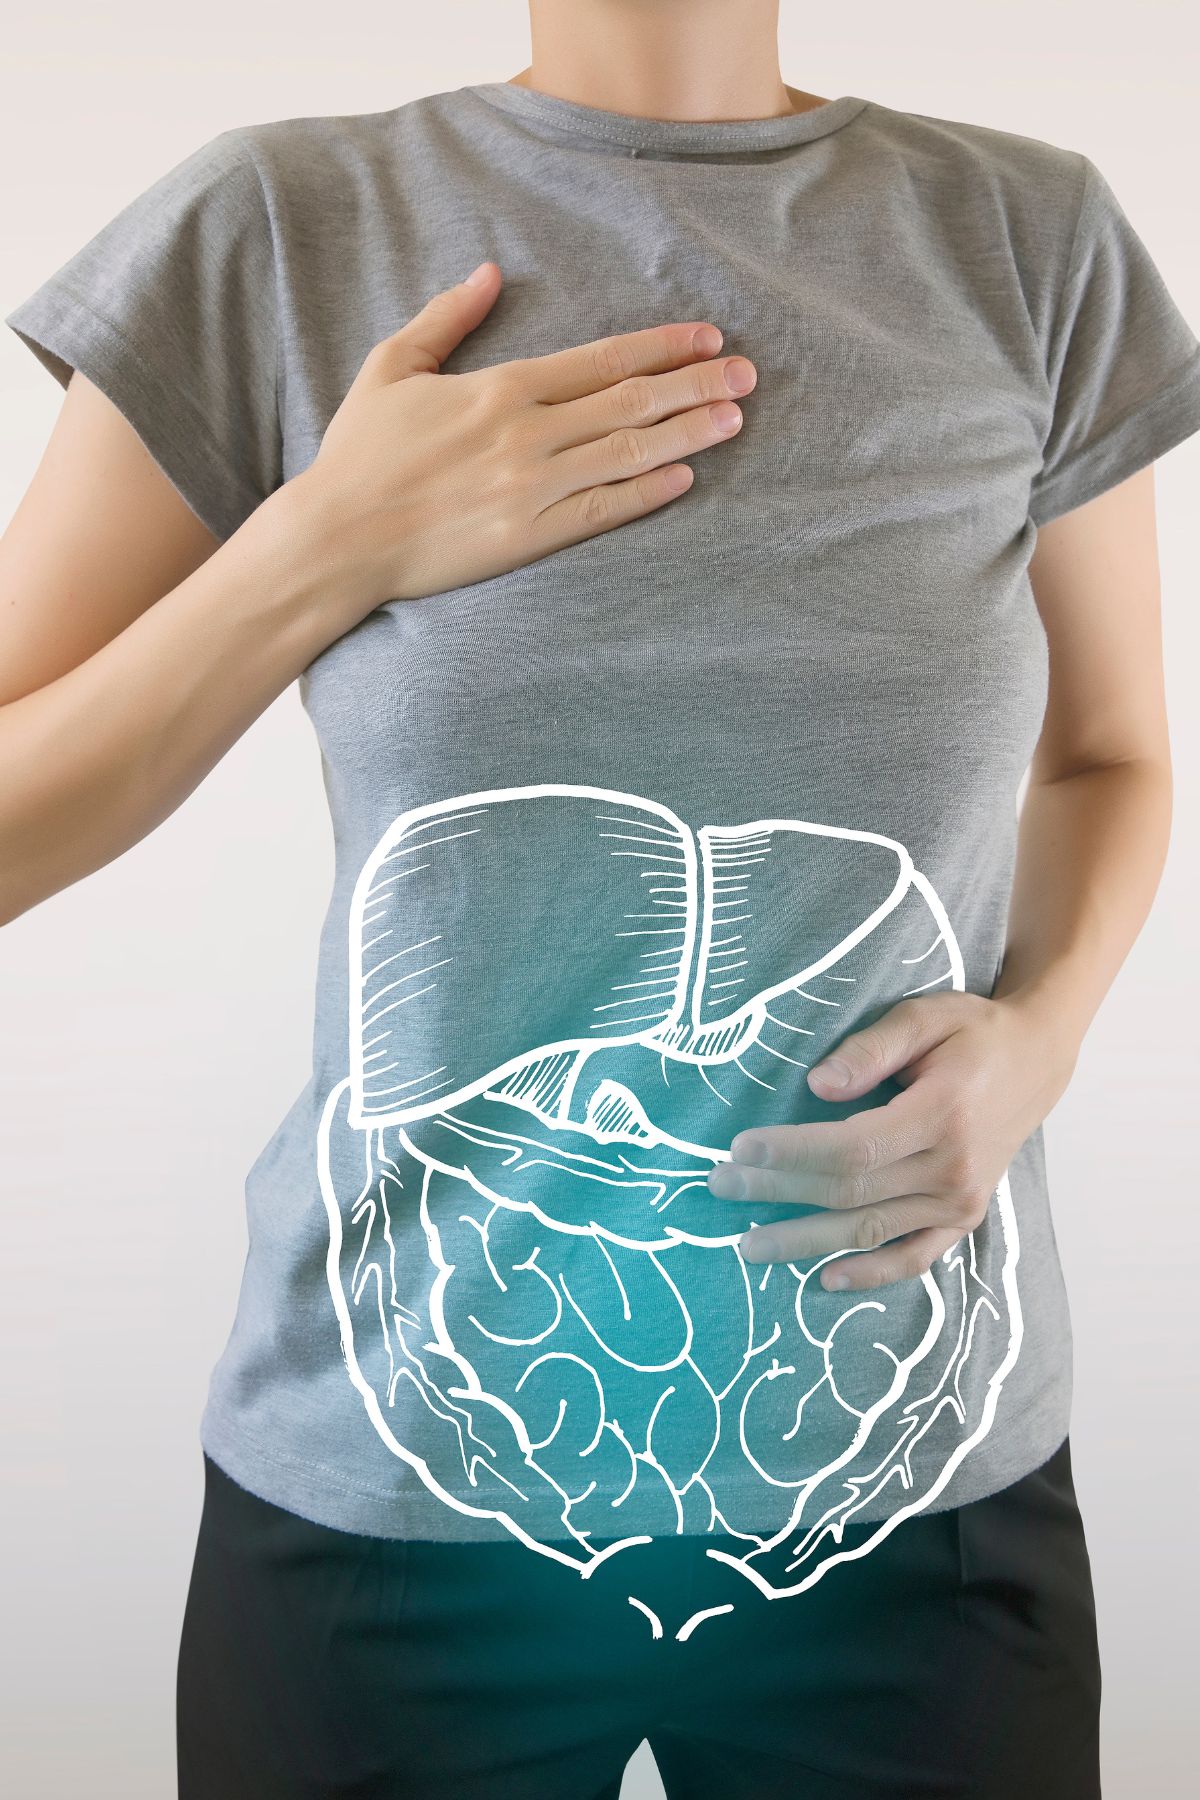 a woman holding her stomach, which has a illustration of her digestive tract.